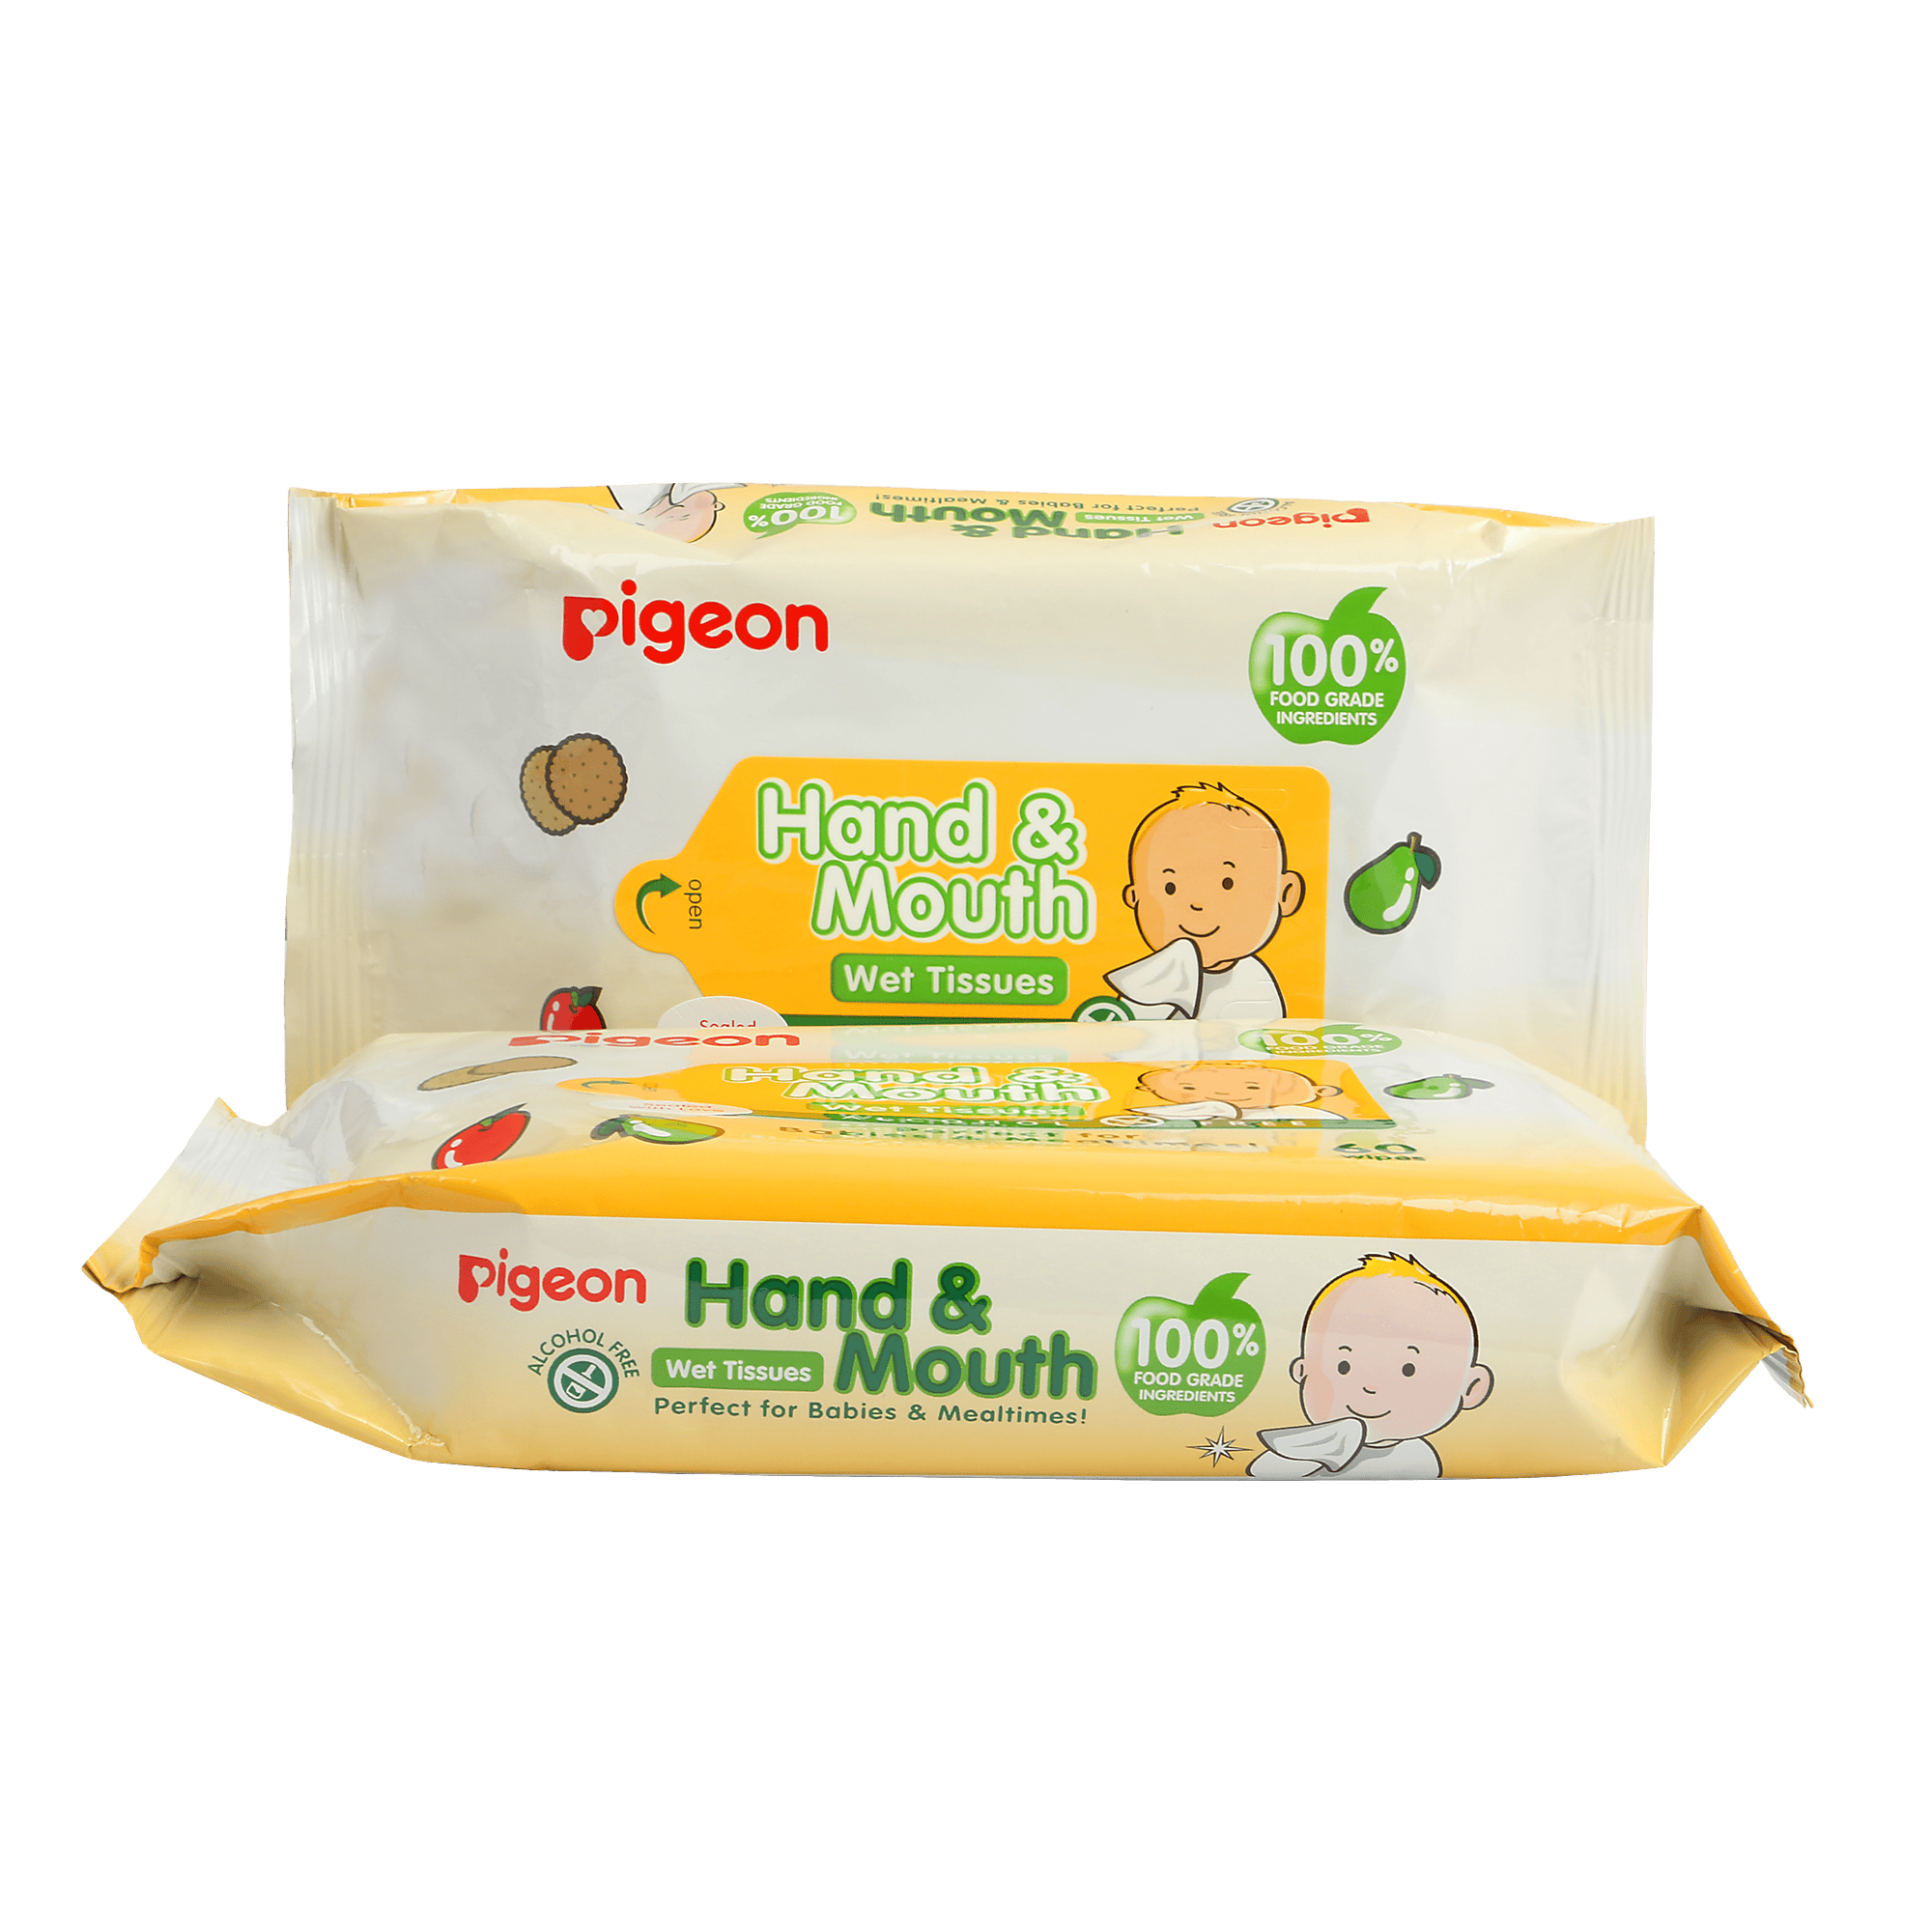 Pigeon Hand & Mouth Wipes